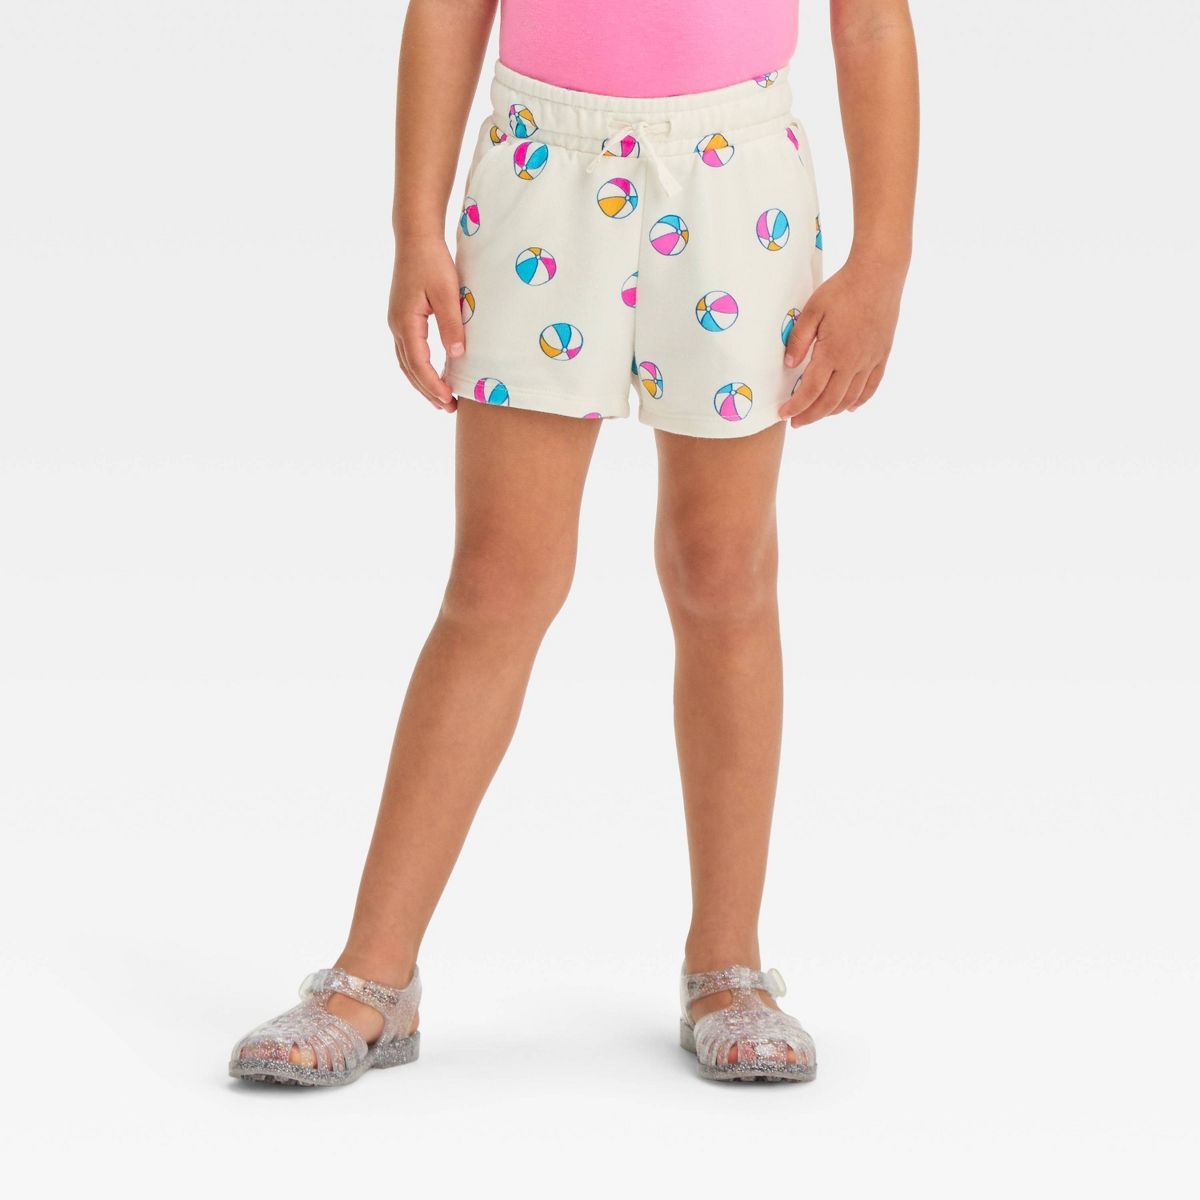 Toddler Knit Volleyball Shorts - Cat & Jack™ Cream | Target